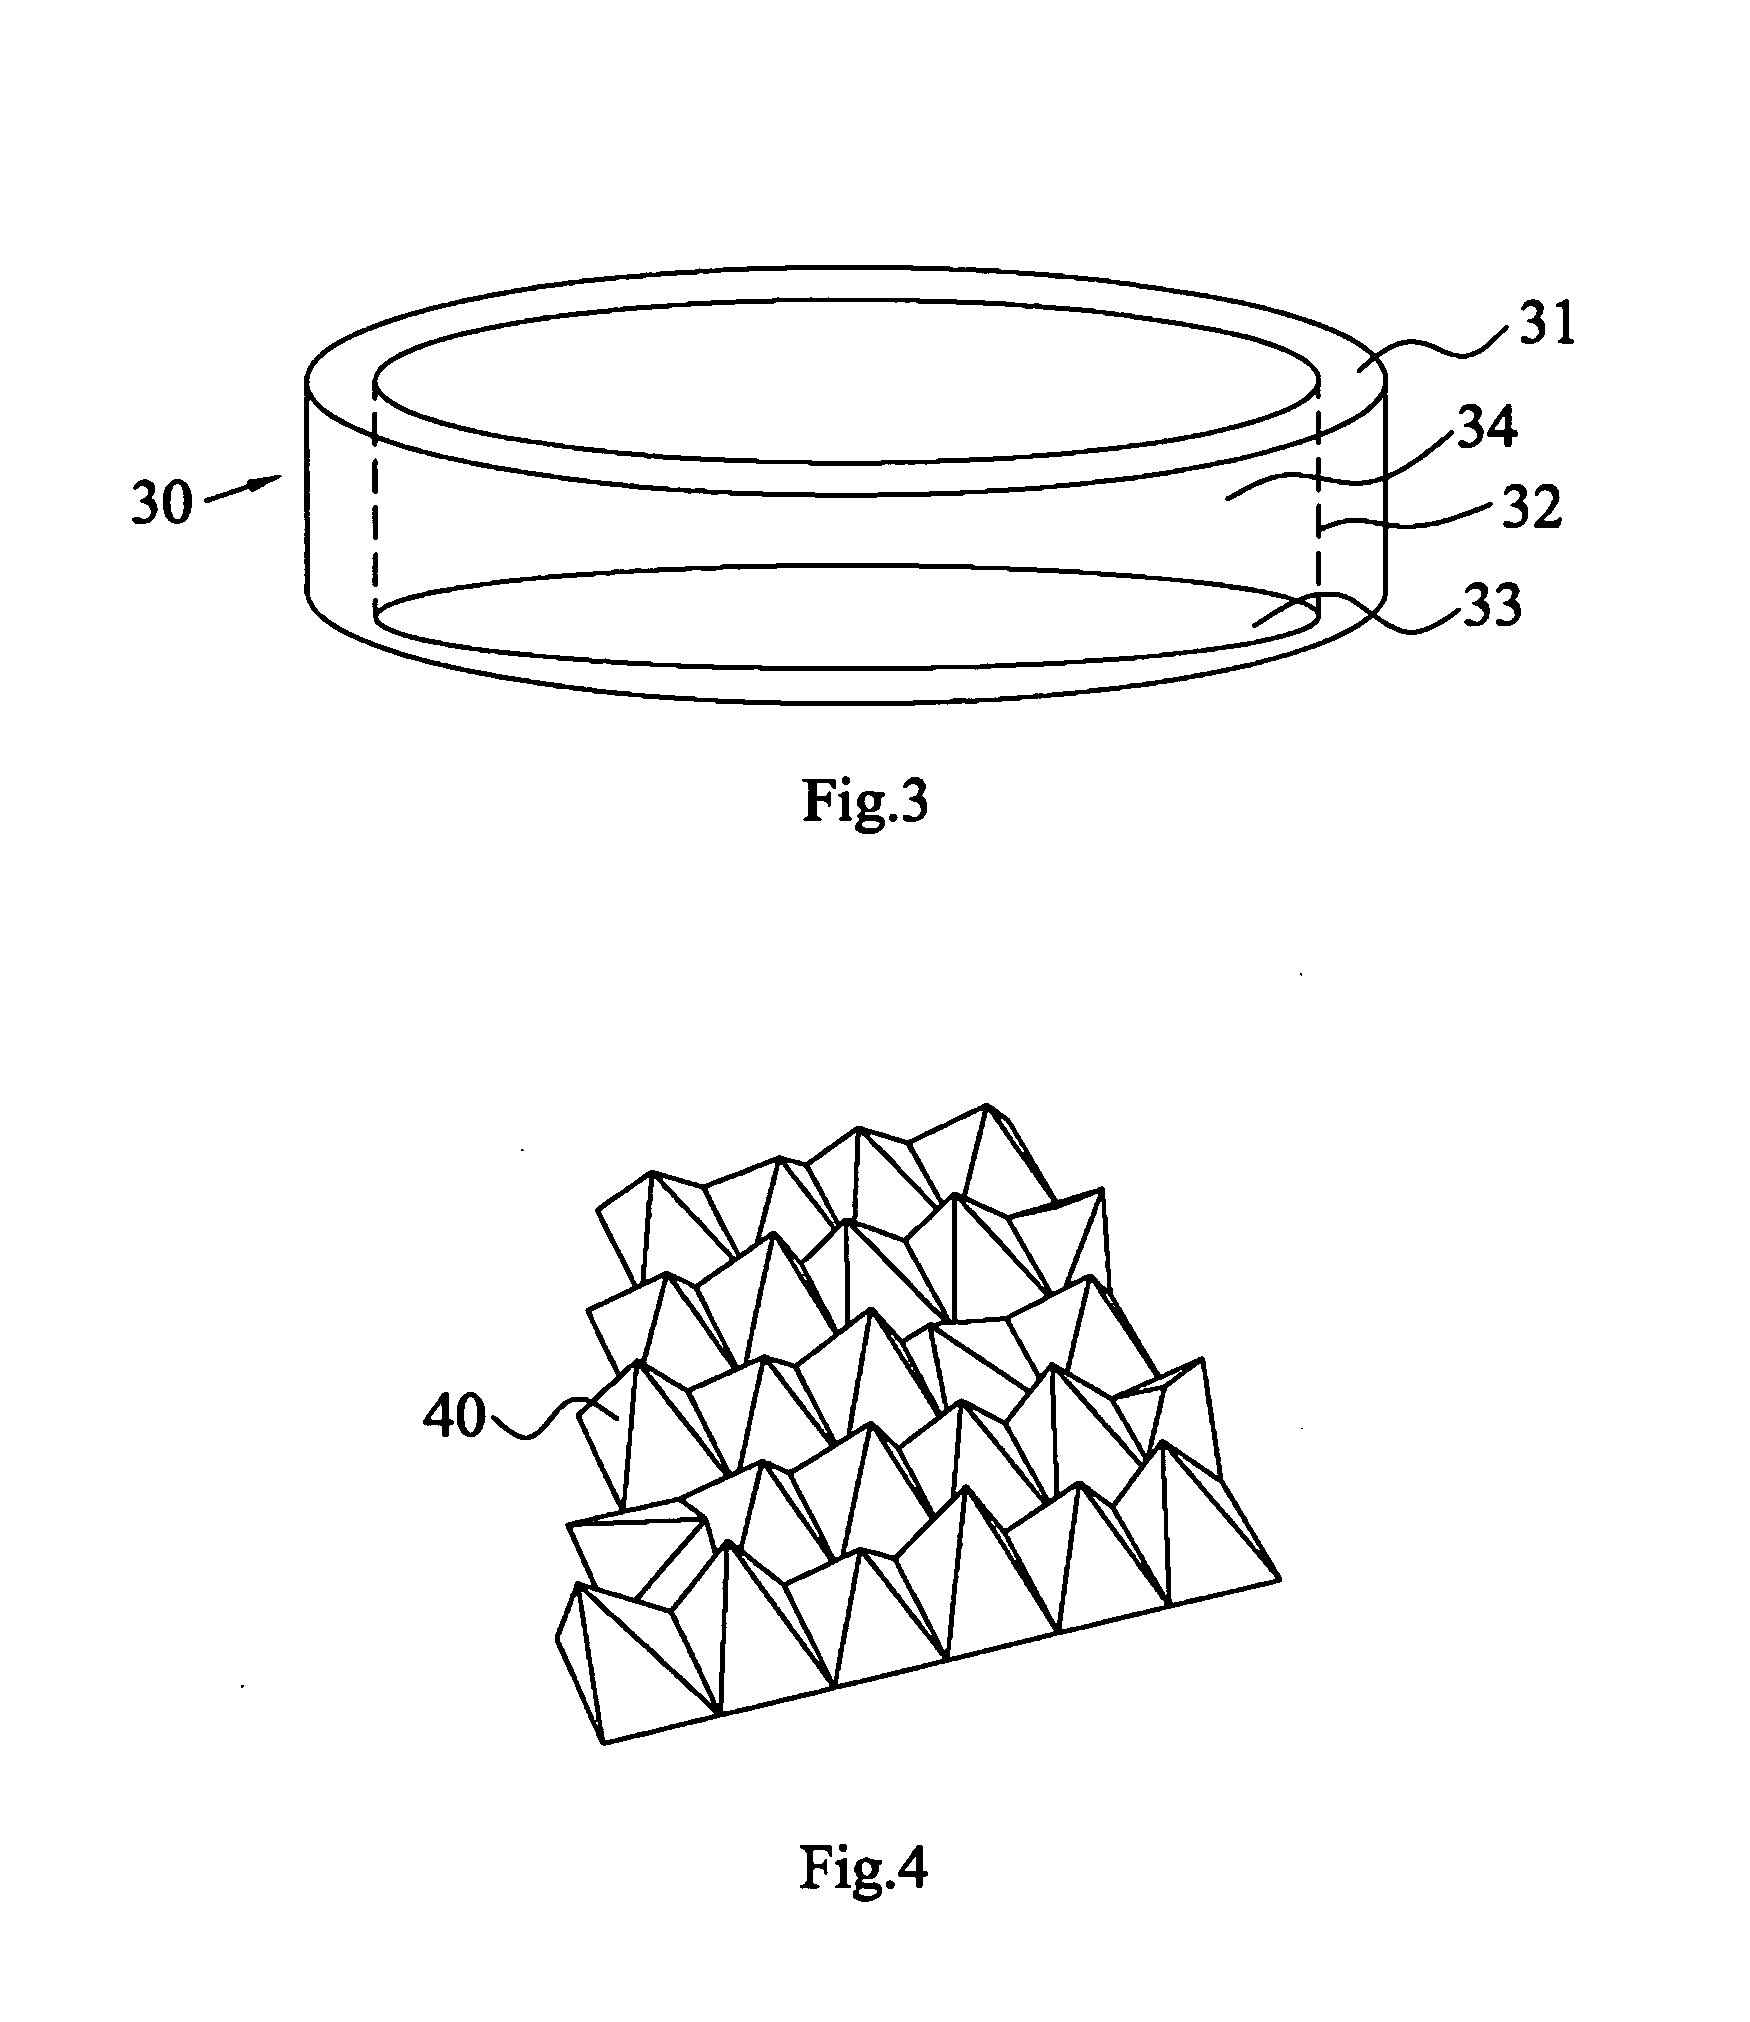 Device for catching phototaxis flying insects